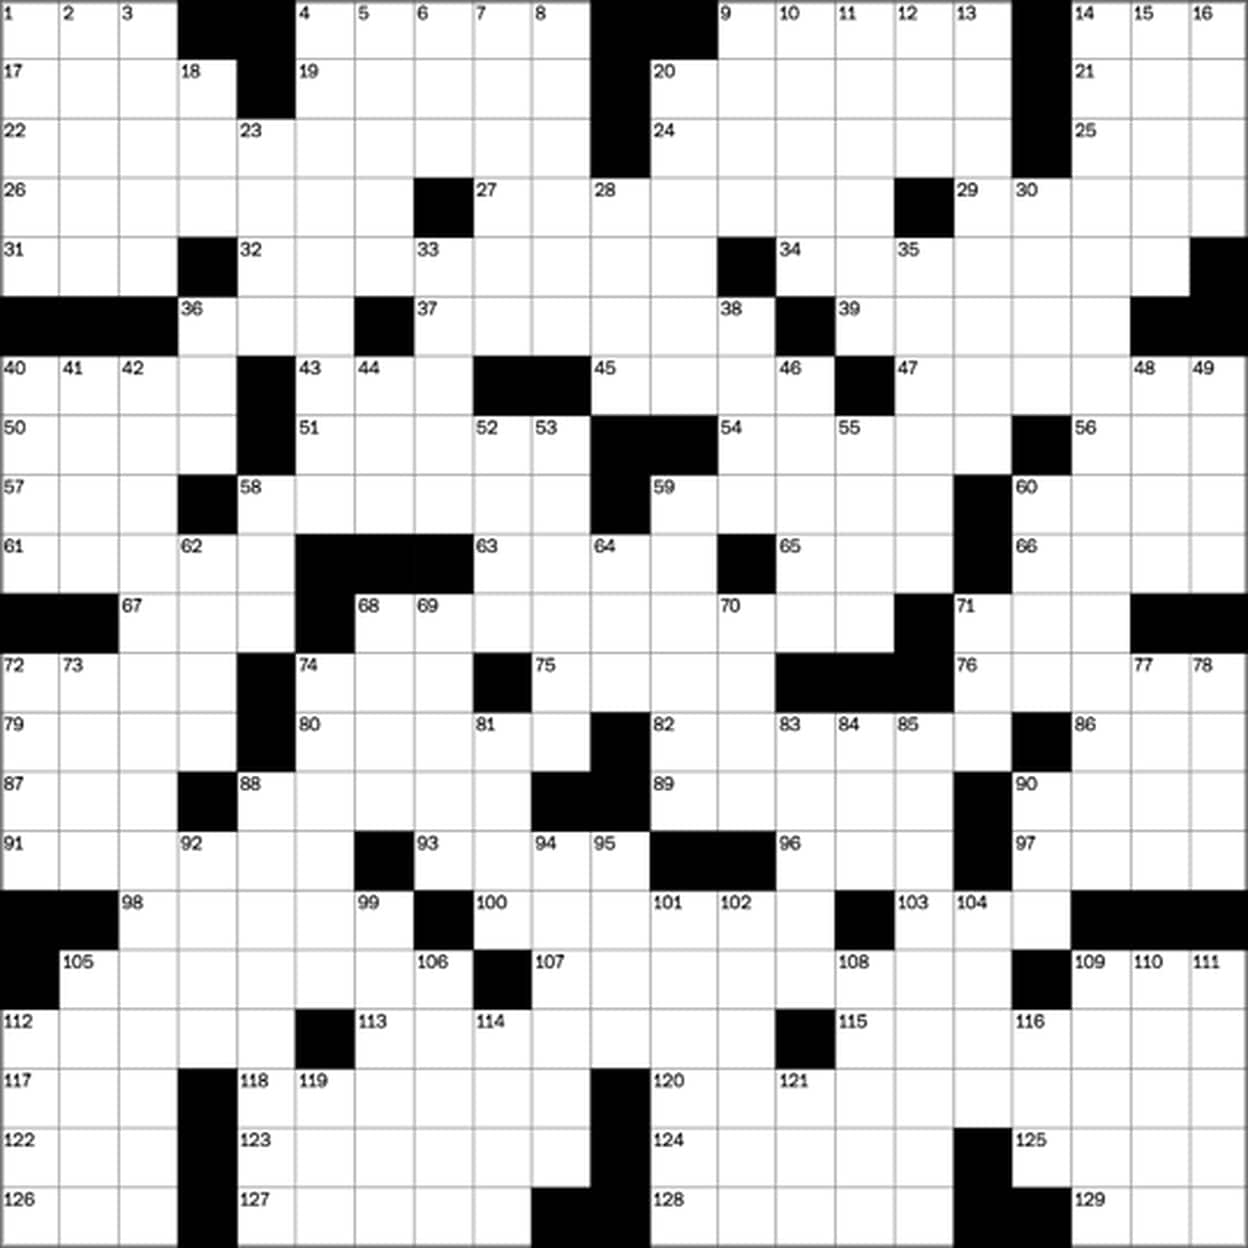 Play Free Crossword Puzzles From The Washington Post - The - Washington Post Sunday Crossword Puzzle Printable